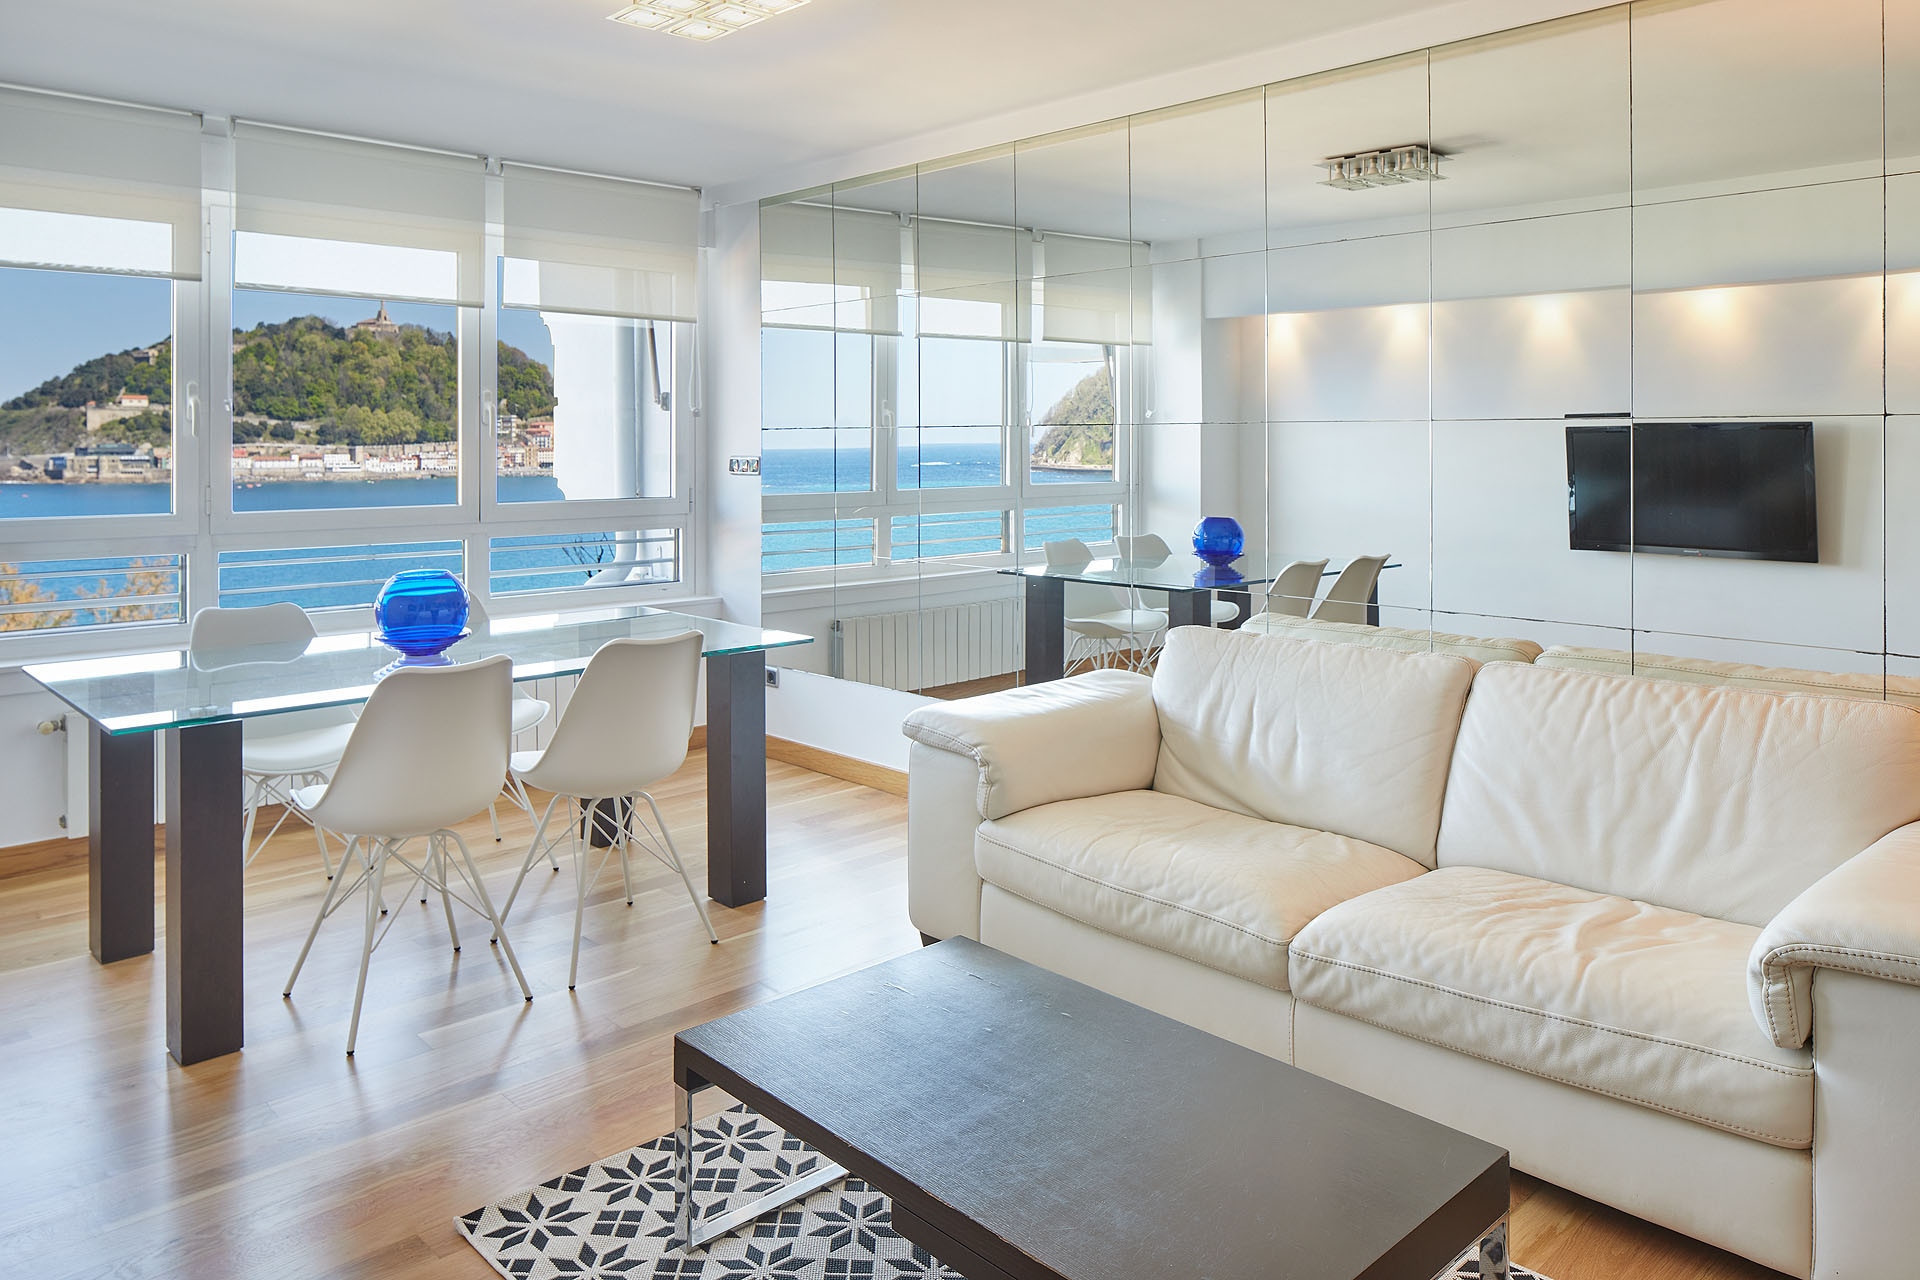 Property Image 2 - Two Bedrooms Apartment with a Stunning Sea View to La Concha Bay